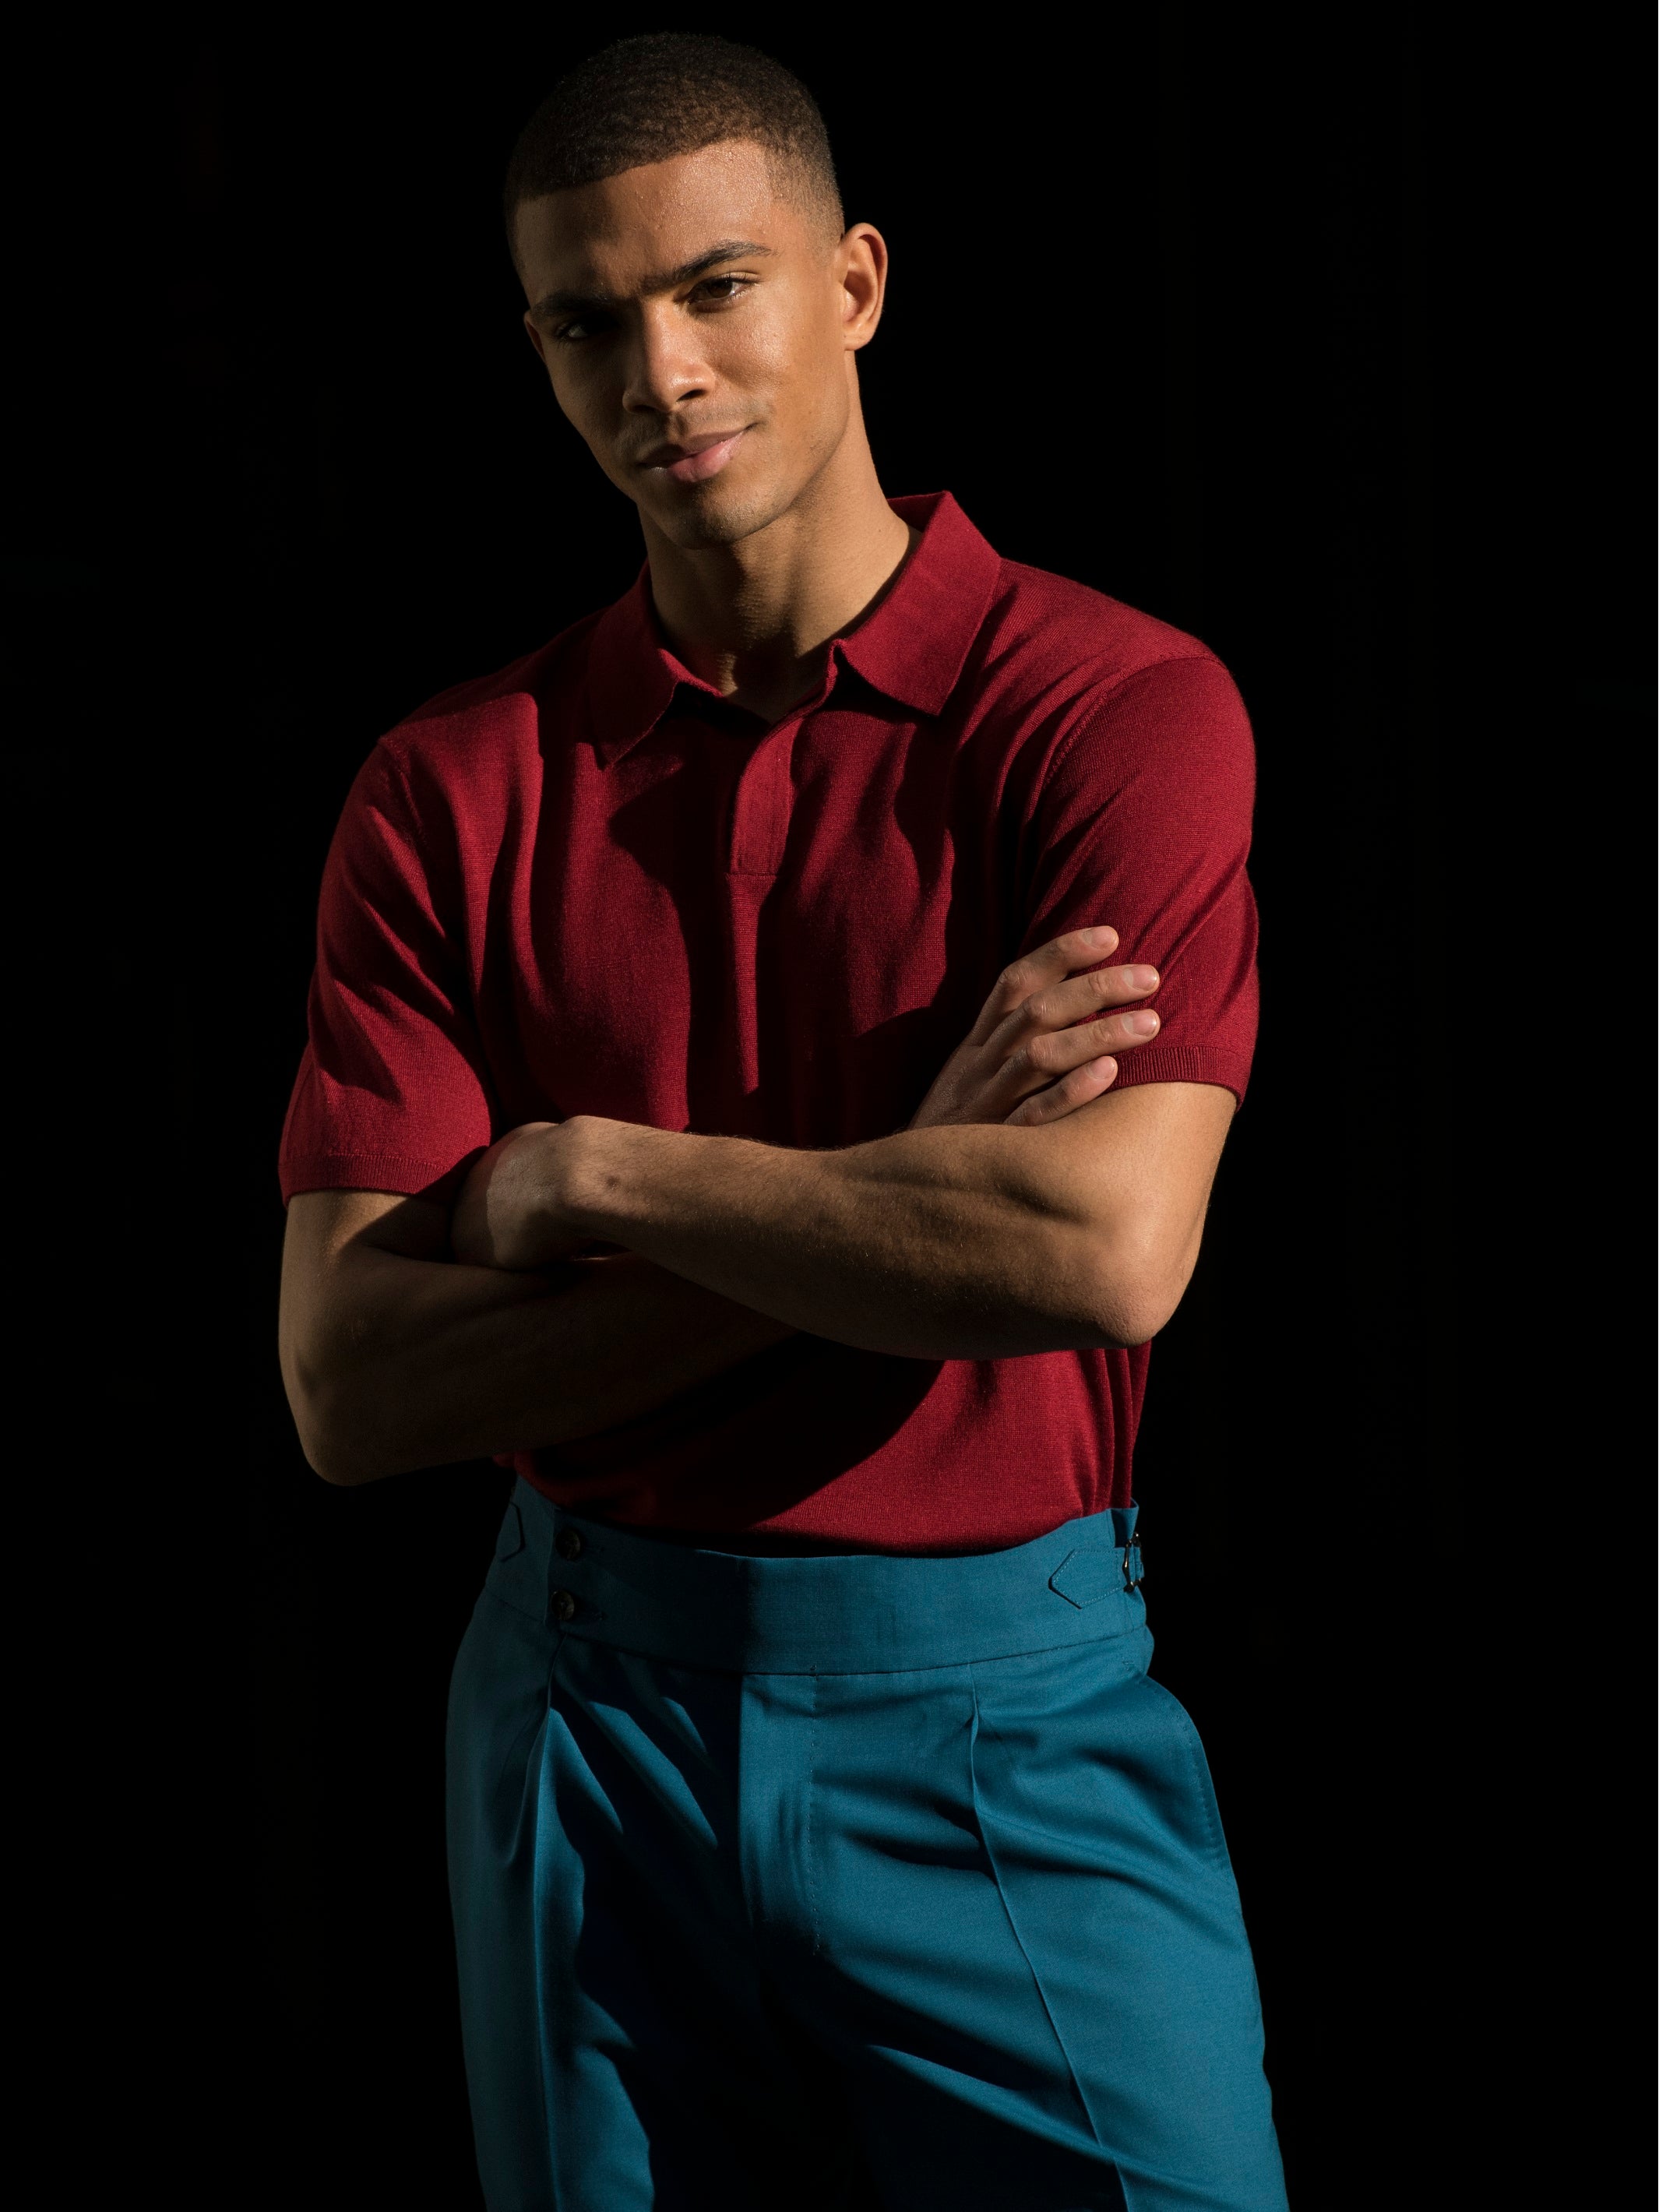 Bordeaux polo shirt made of natural silk and merino wool